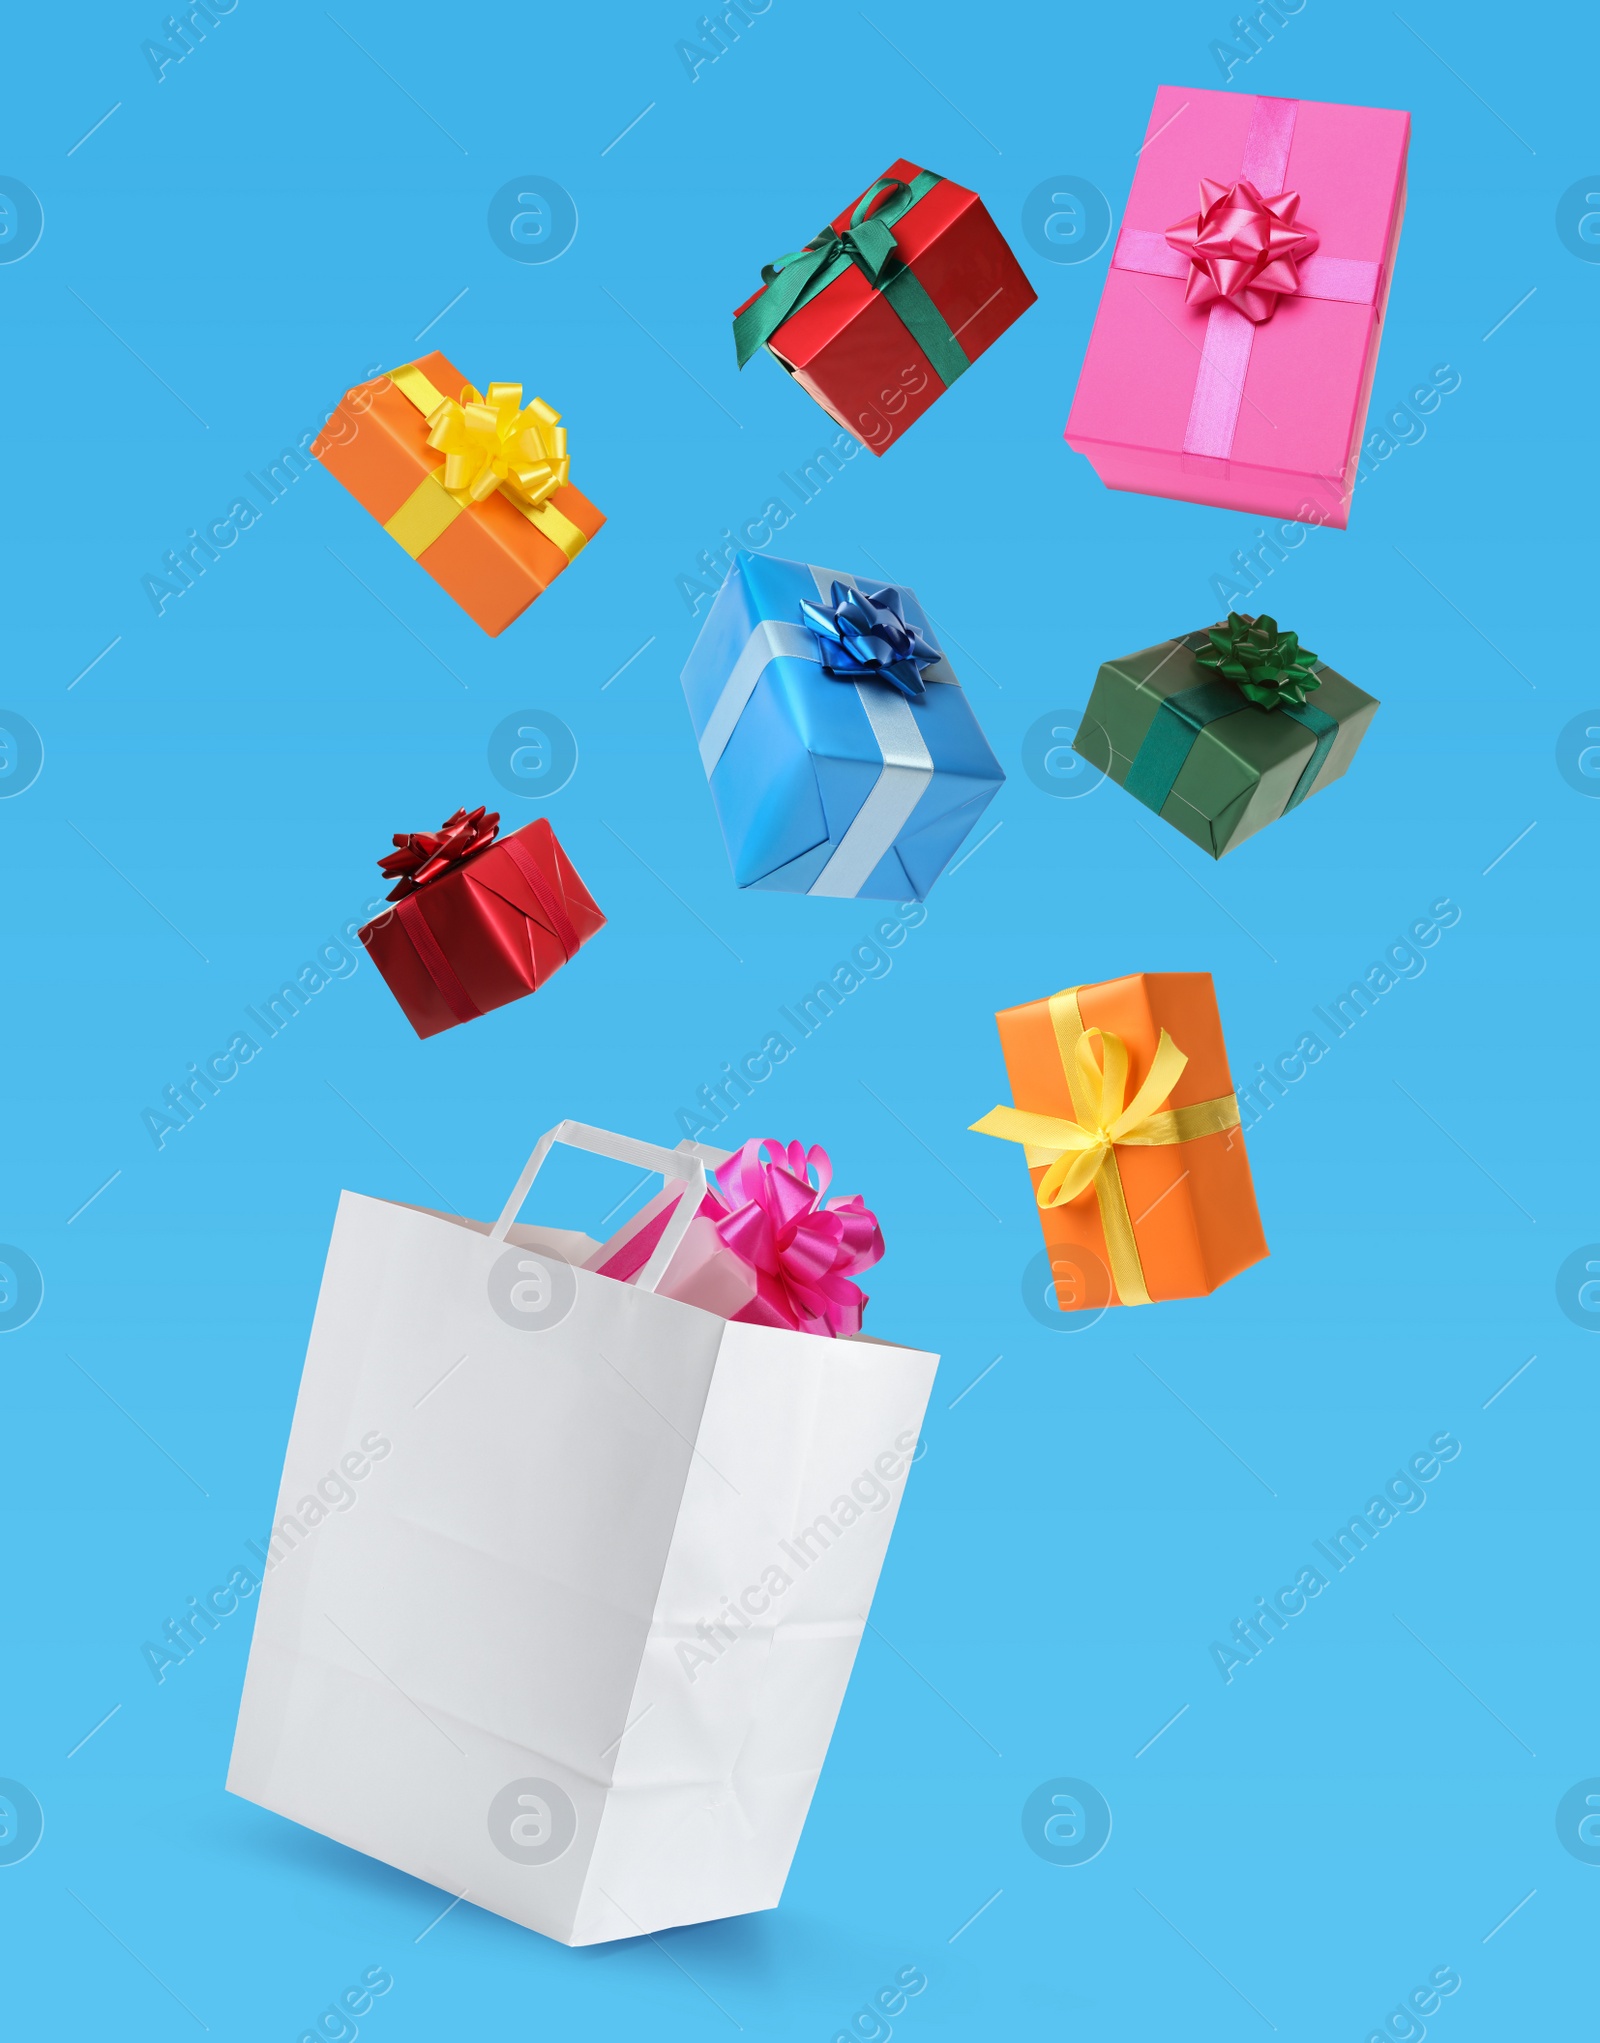 Image of Many different gift boxes falling into paper shopping bag on light blue background